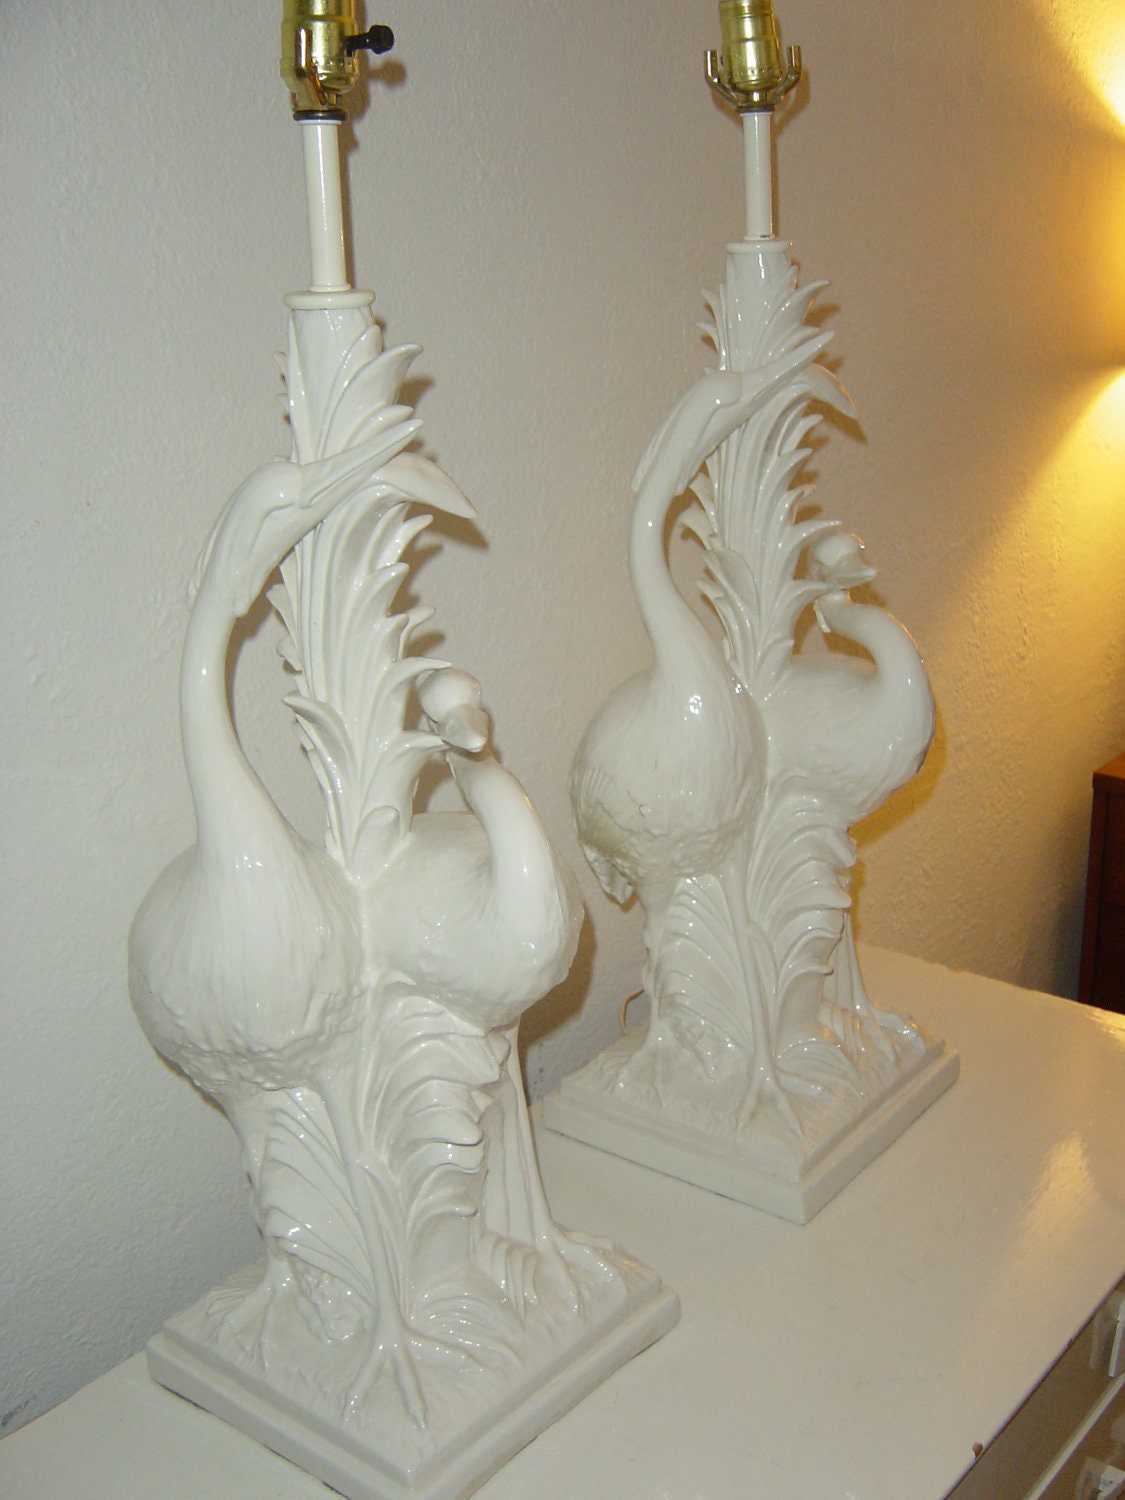 Fabulous pair of unique Vintage Egrets Palm Beach Hollywood Regency style lamps on hold.